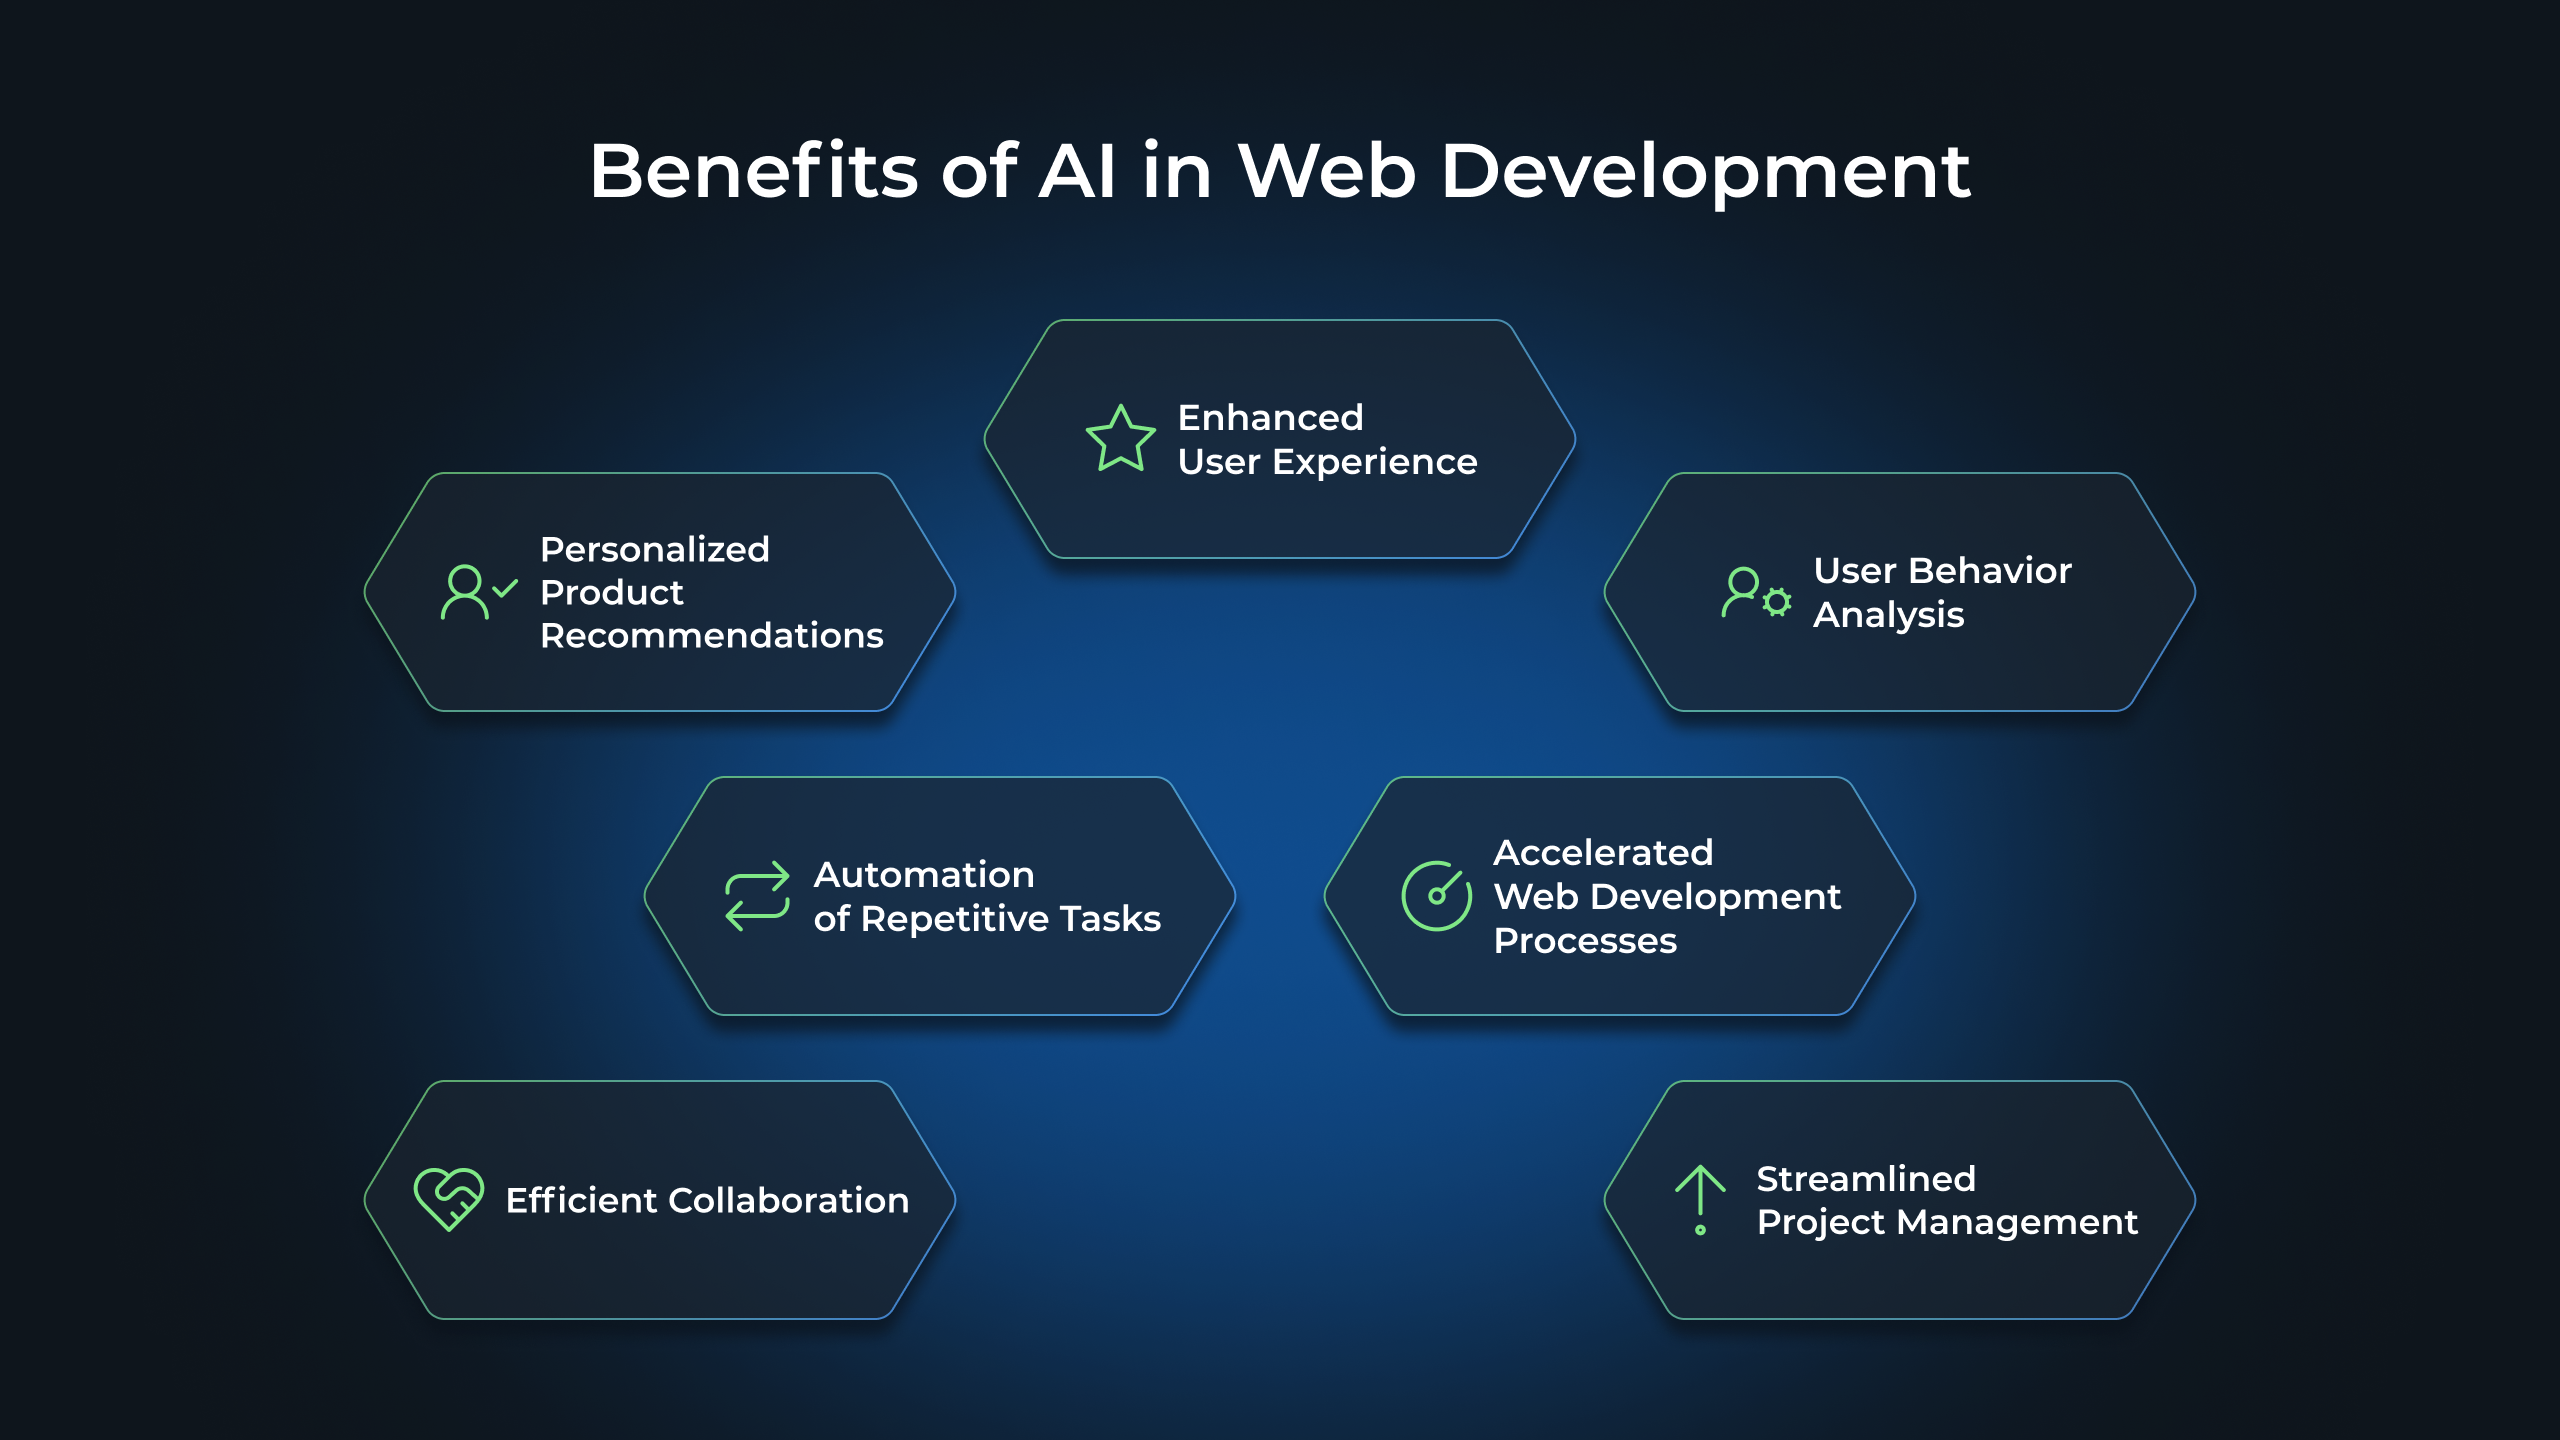 Benefits of AI in Web Development: Enhanced User Experience, Personalized Product Recommendations, User, Behavior Analysis, Automation of Repetitive Tasks, Accelerated Web Development Processes, Efficient Collaboration, Streamlined Project Management
